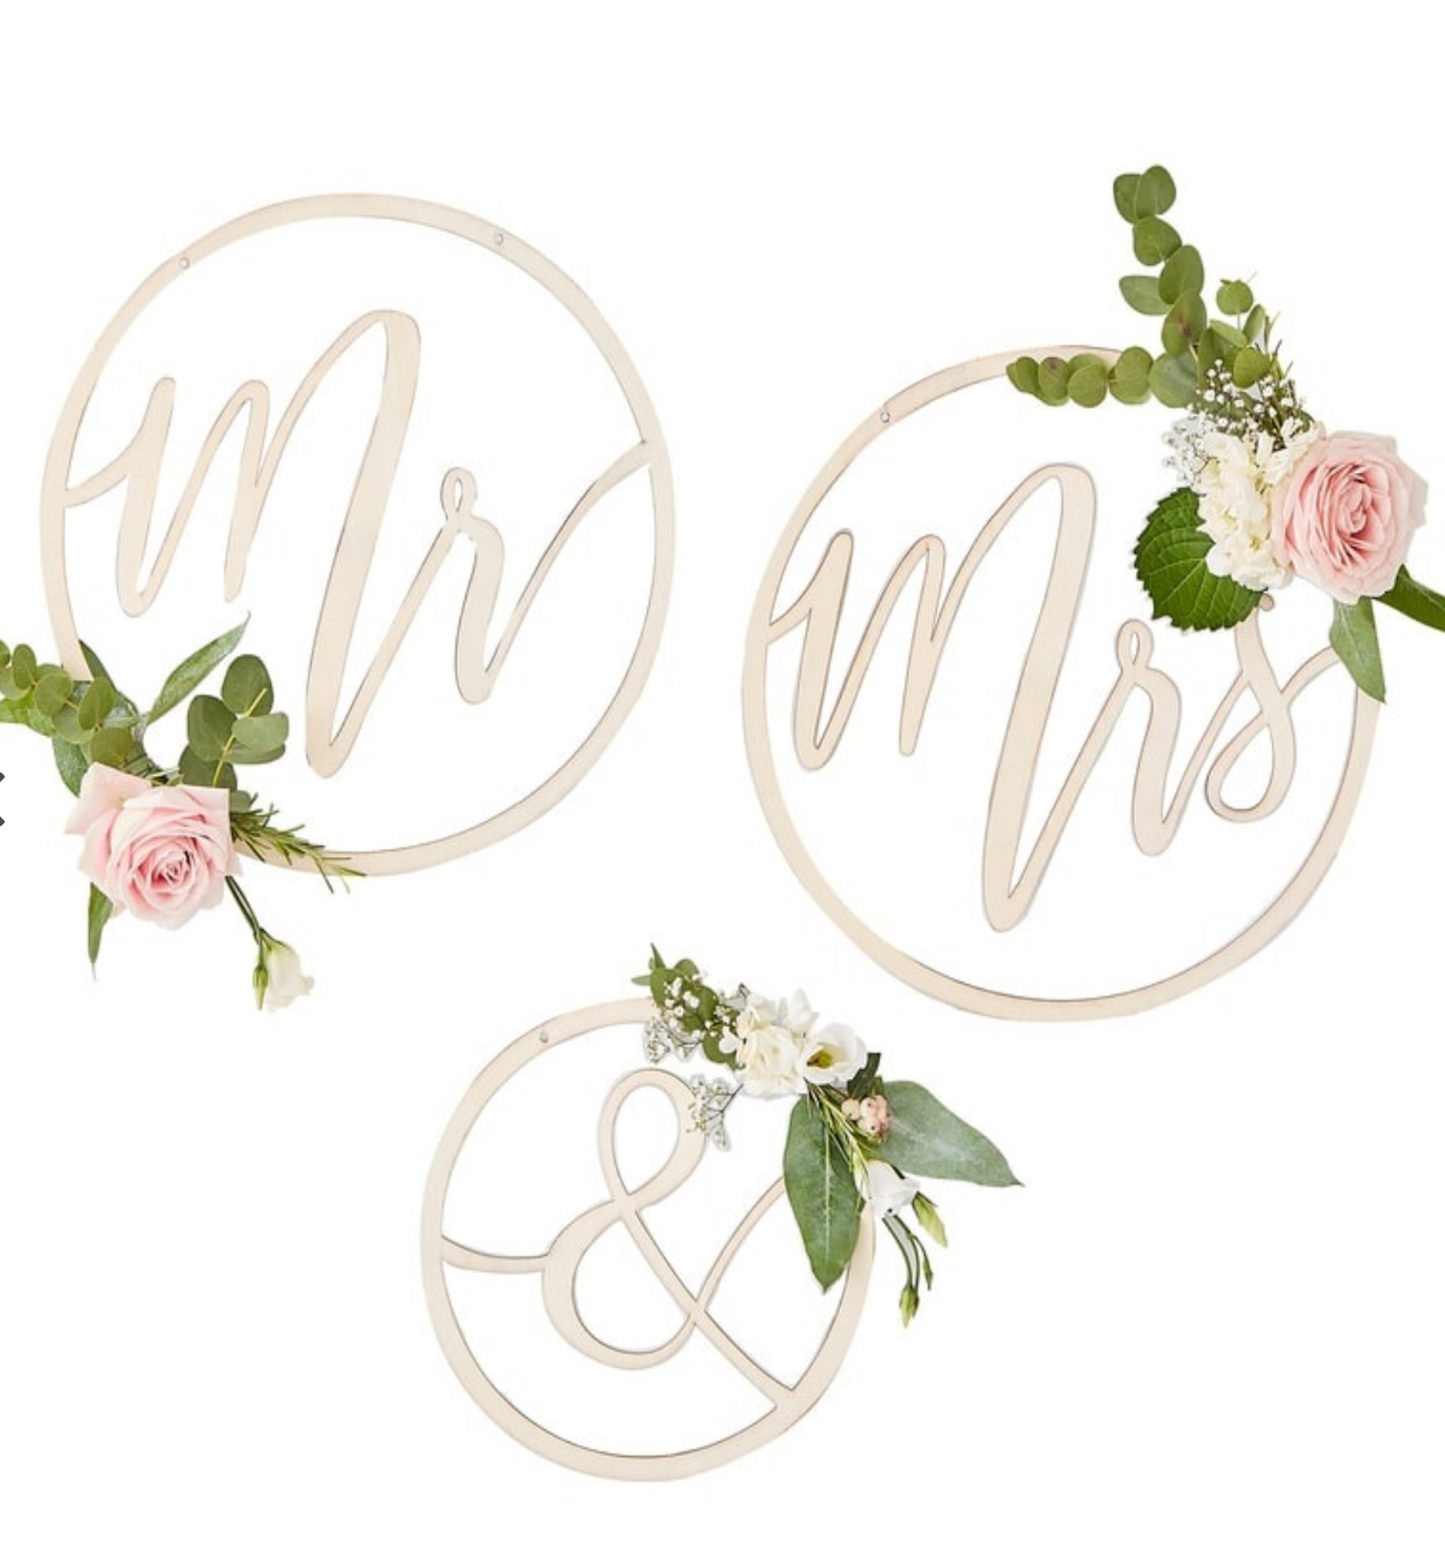 Wooden Hoop Wreath Mr & Mrs, Mr and Mrs Signs, Wooden Wedding Decorations, Rustic Wedding Decor, Wedding Decoration Hoops, Chair Signs